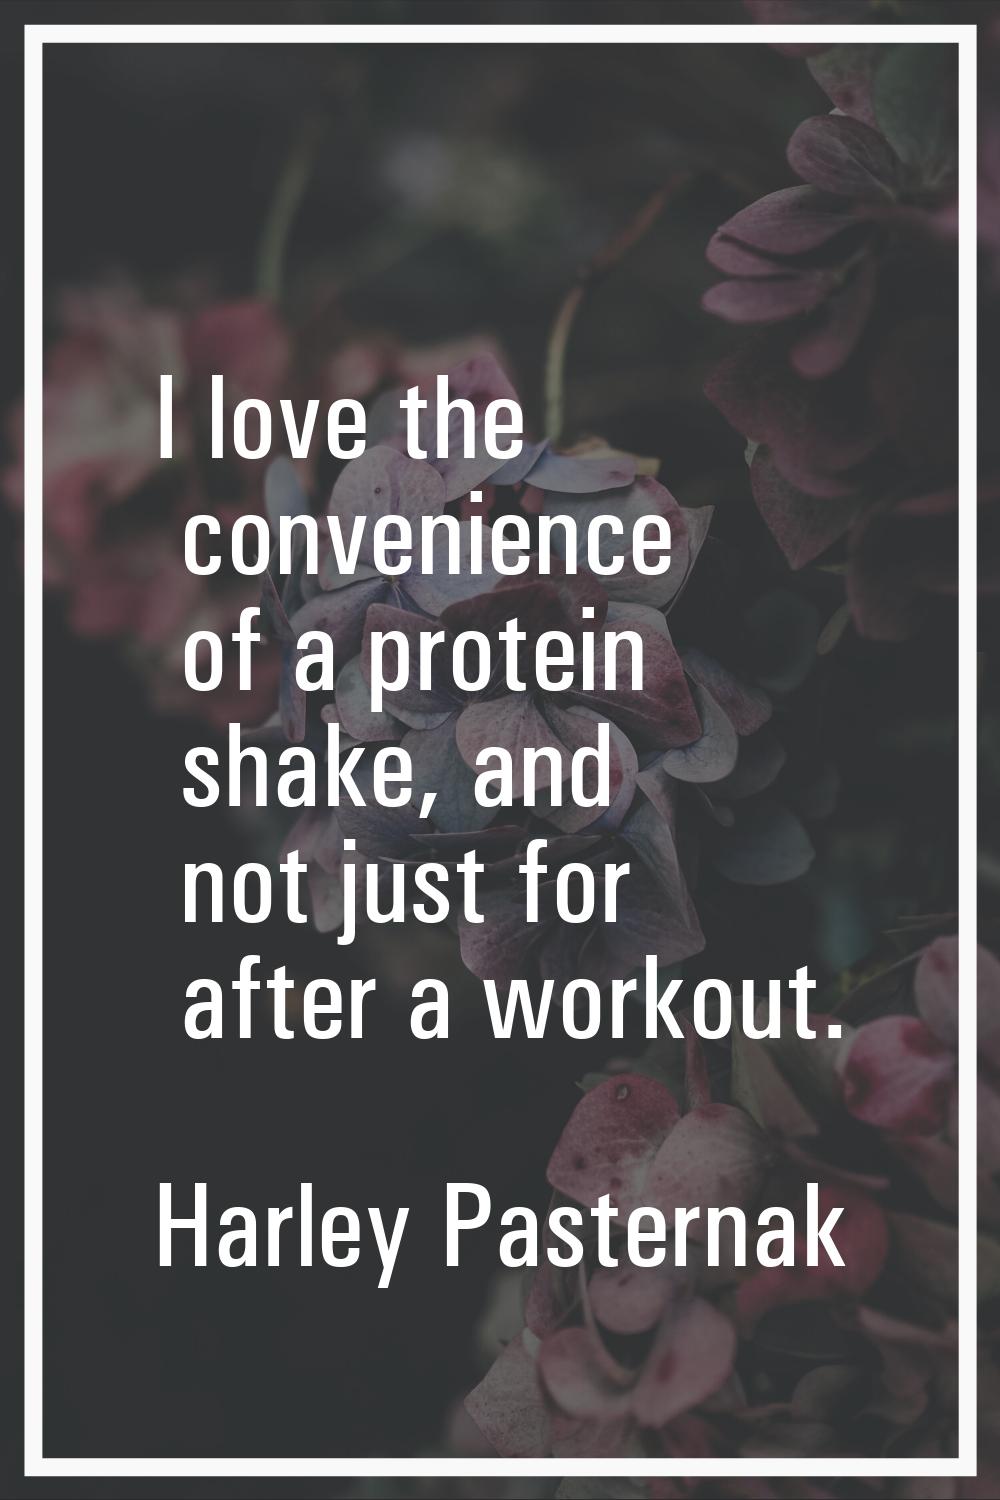 I love the convenience of a protein shake, and not just for after a workout.